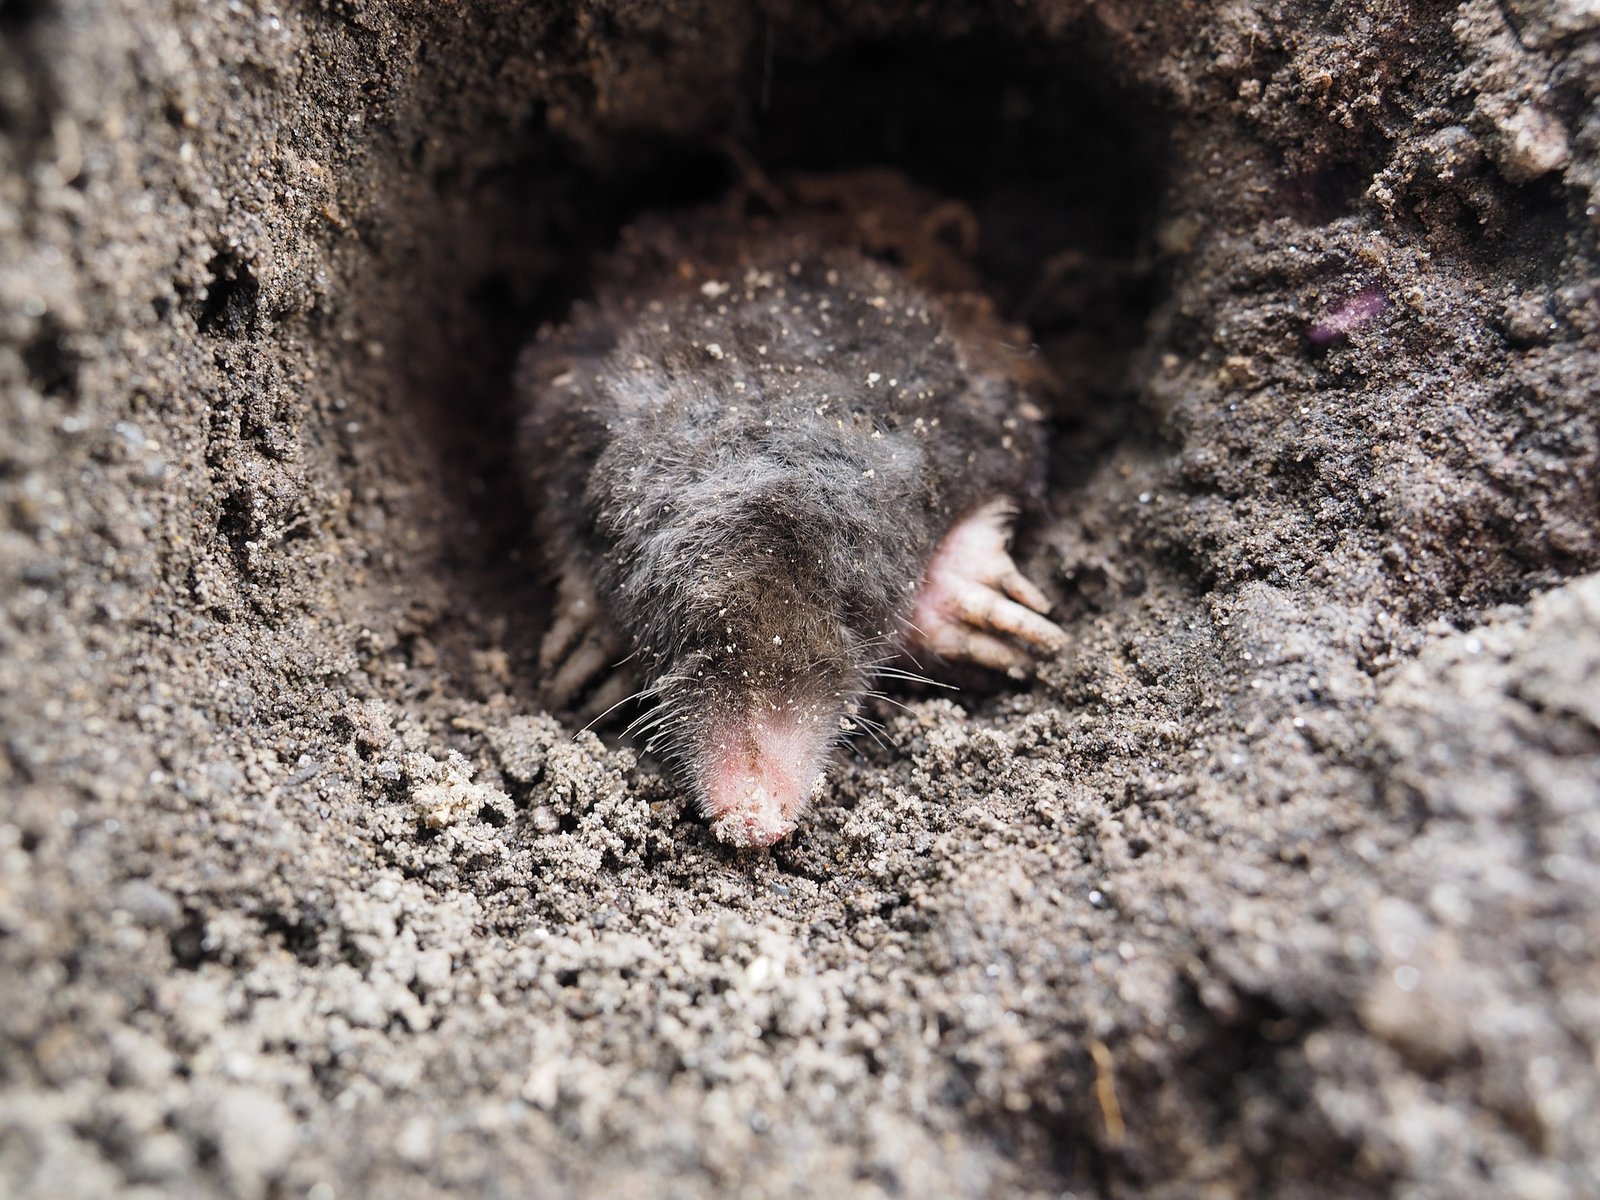 Photograph of a tunneling mole